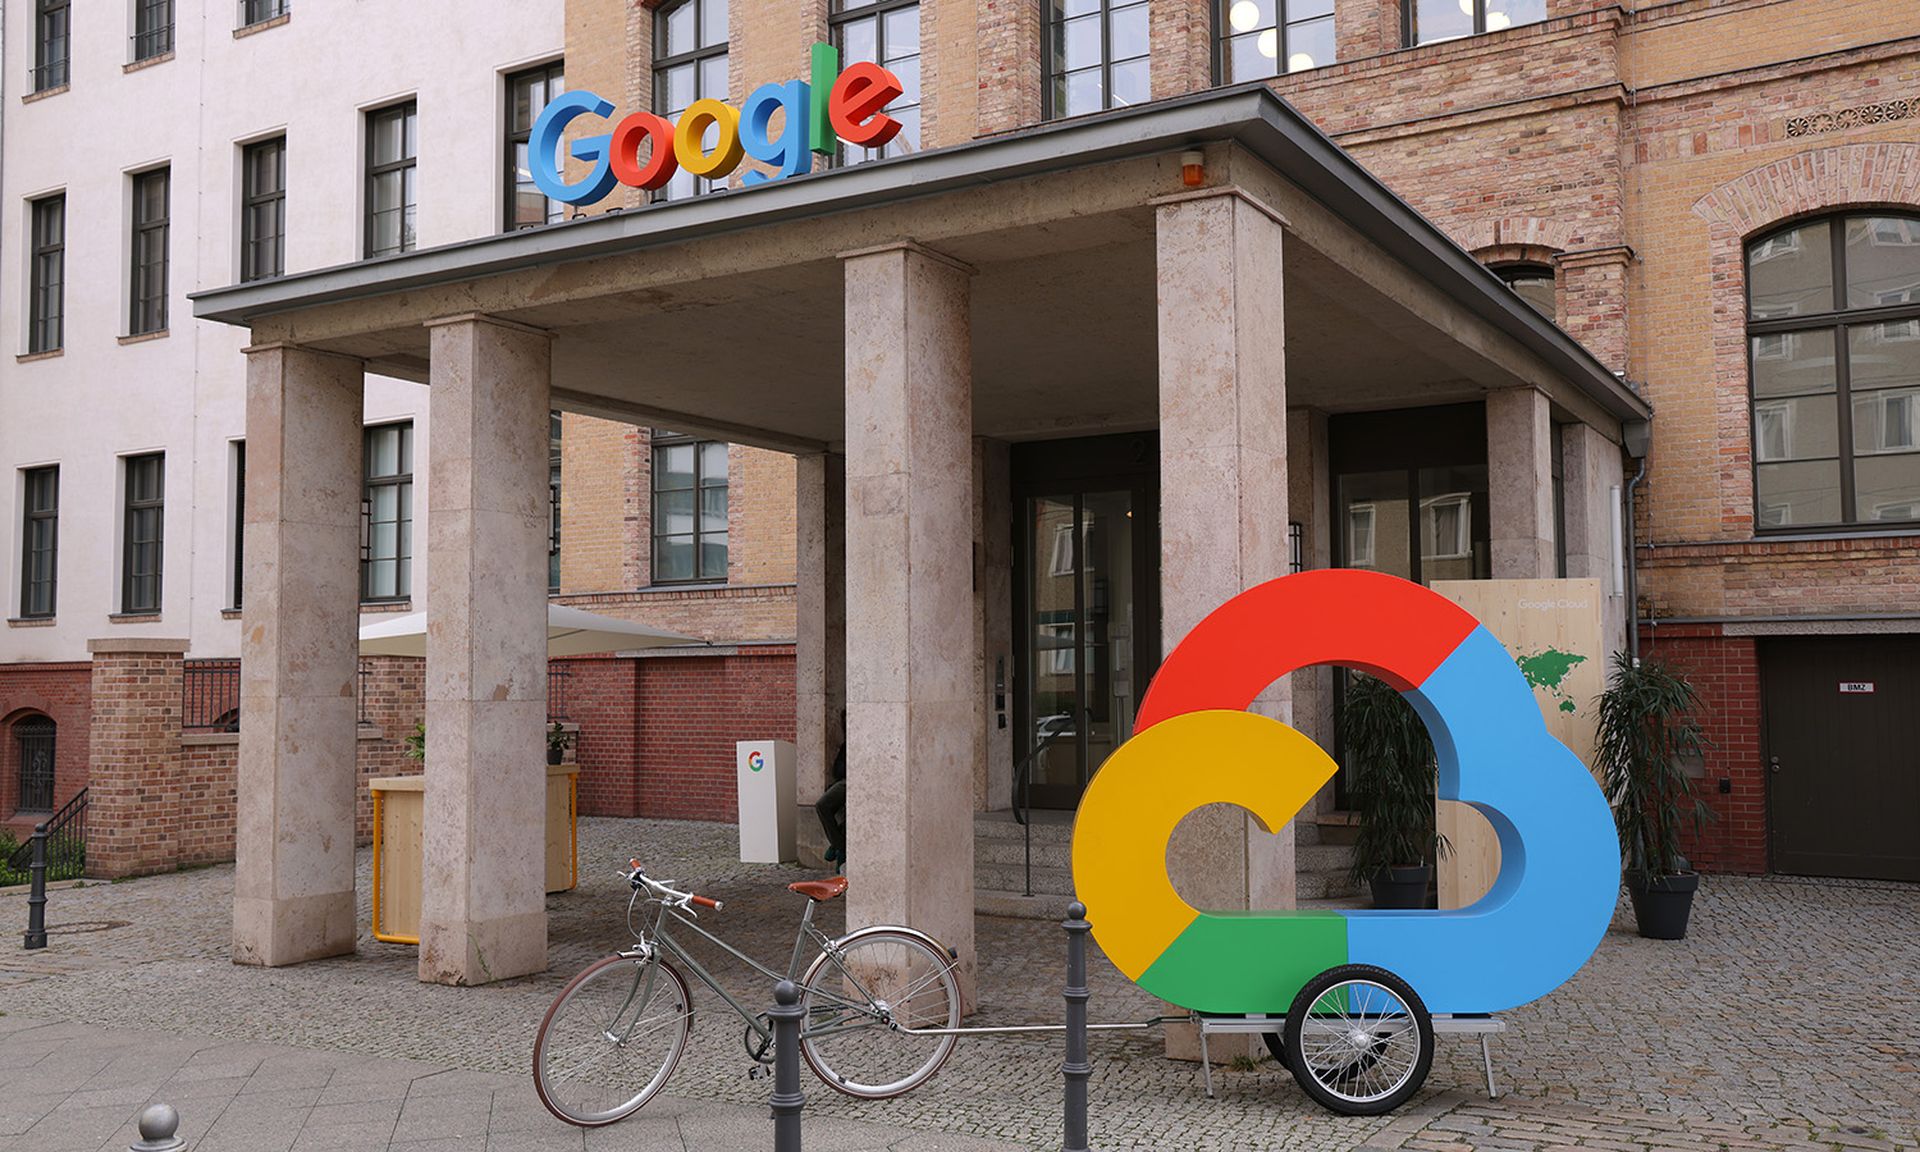 The Google corporate logo and Google Cloud logo stand outside the Google Germany offices on Aug. 31, 2021, in Berlin. (Photo by Sean Gallup/Getty Images)